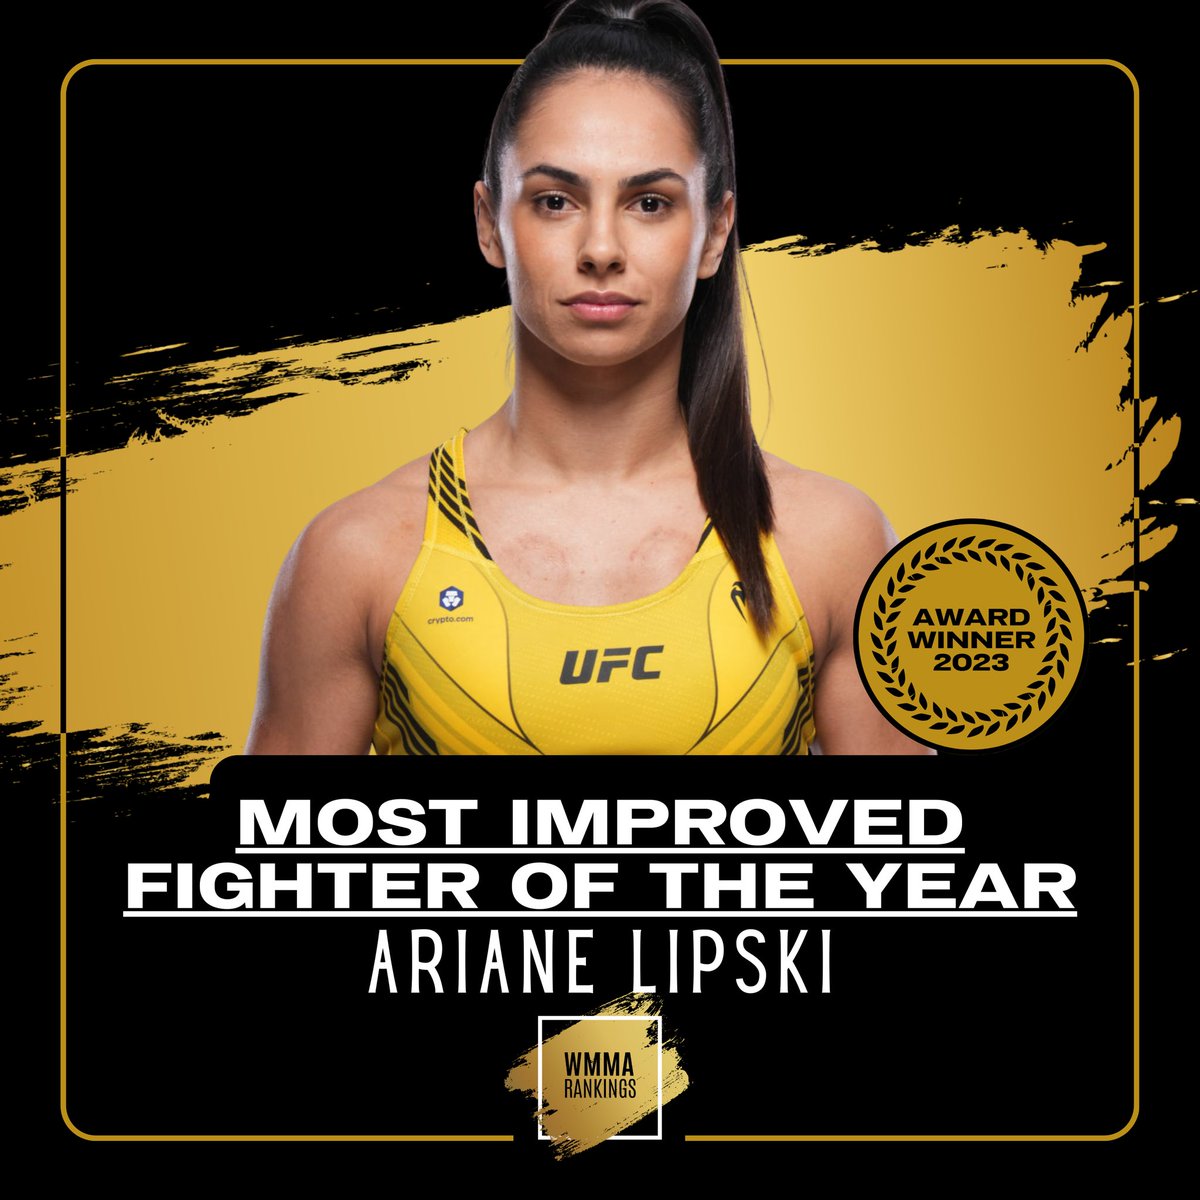 The 'WMMA Rankings Most Improved Fighter of the Year' for 2023 is awarded to... 🏆 Ariane Lipski! The “Queen of Violence” has demonstrated rapid evolution this year, going 3-0 and entering the flyweight ranks after becoming the first person to finish Casey O’Neill. #WMMA #UFC